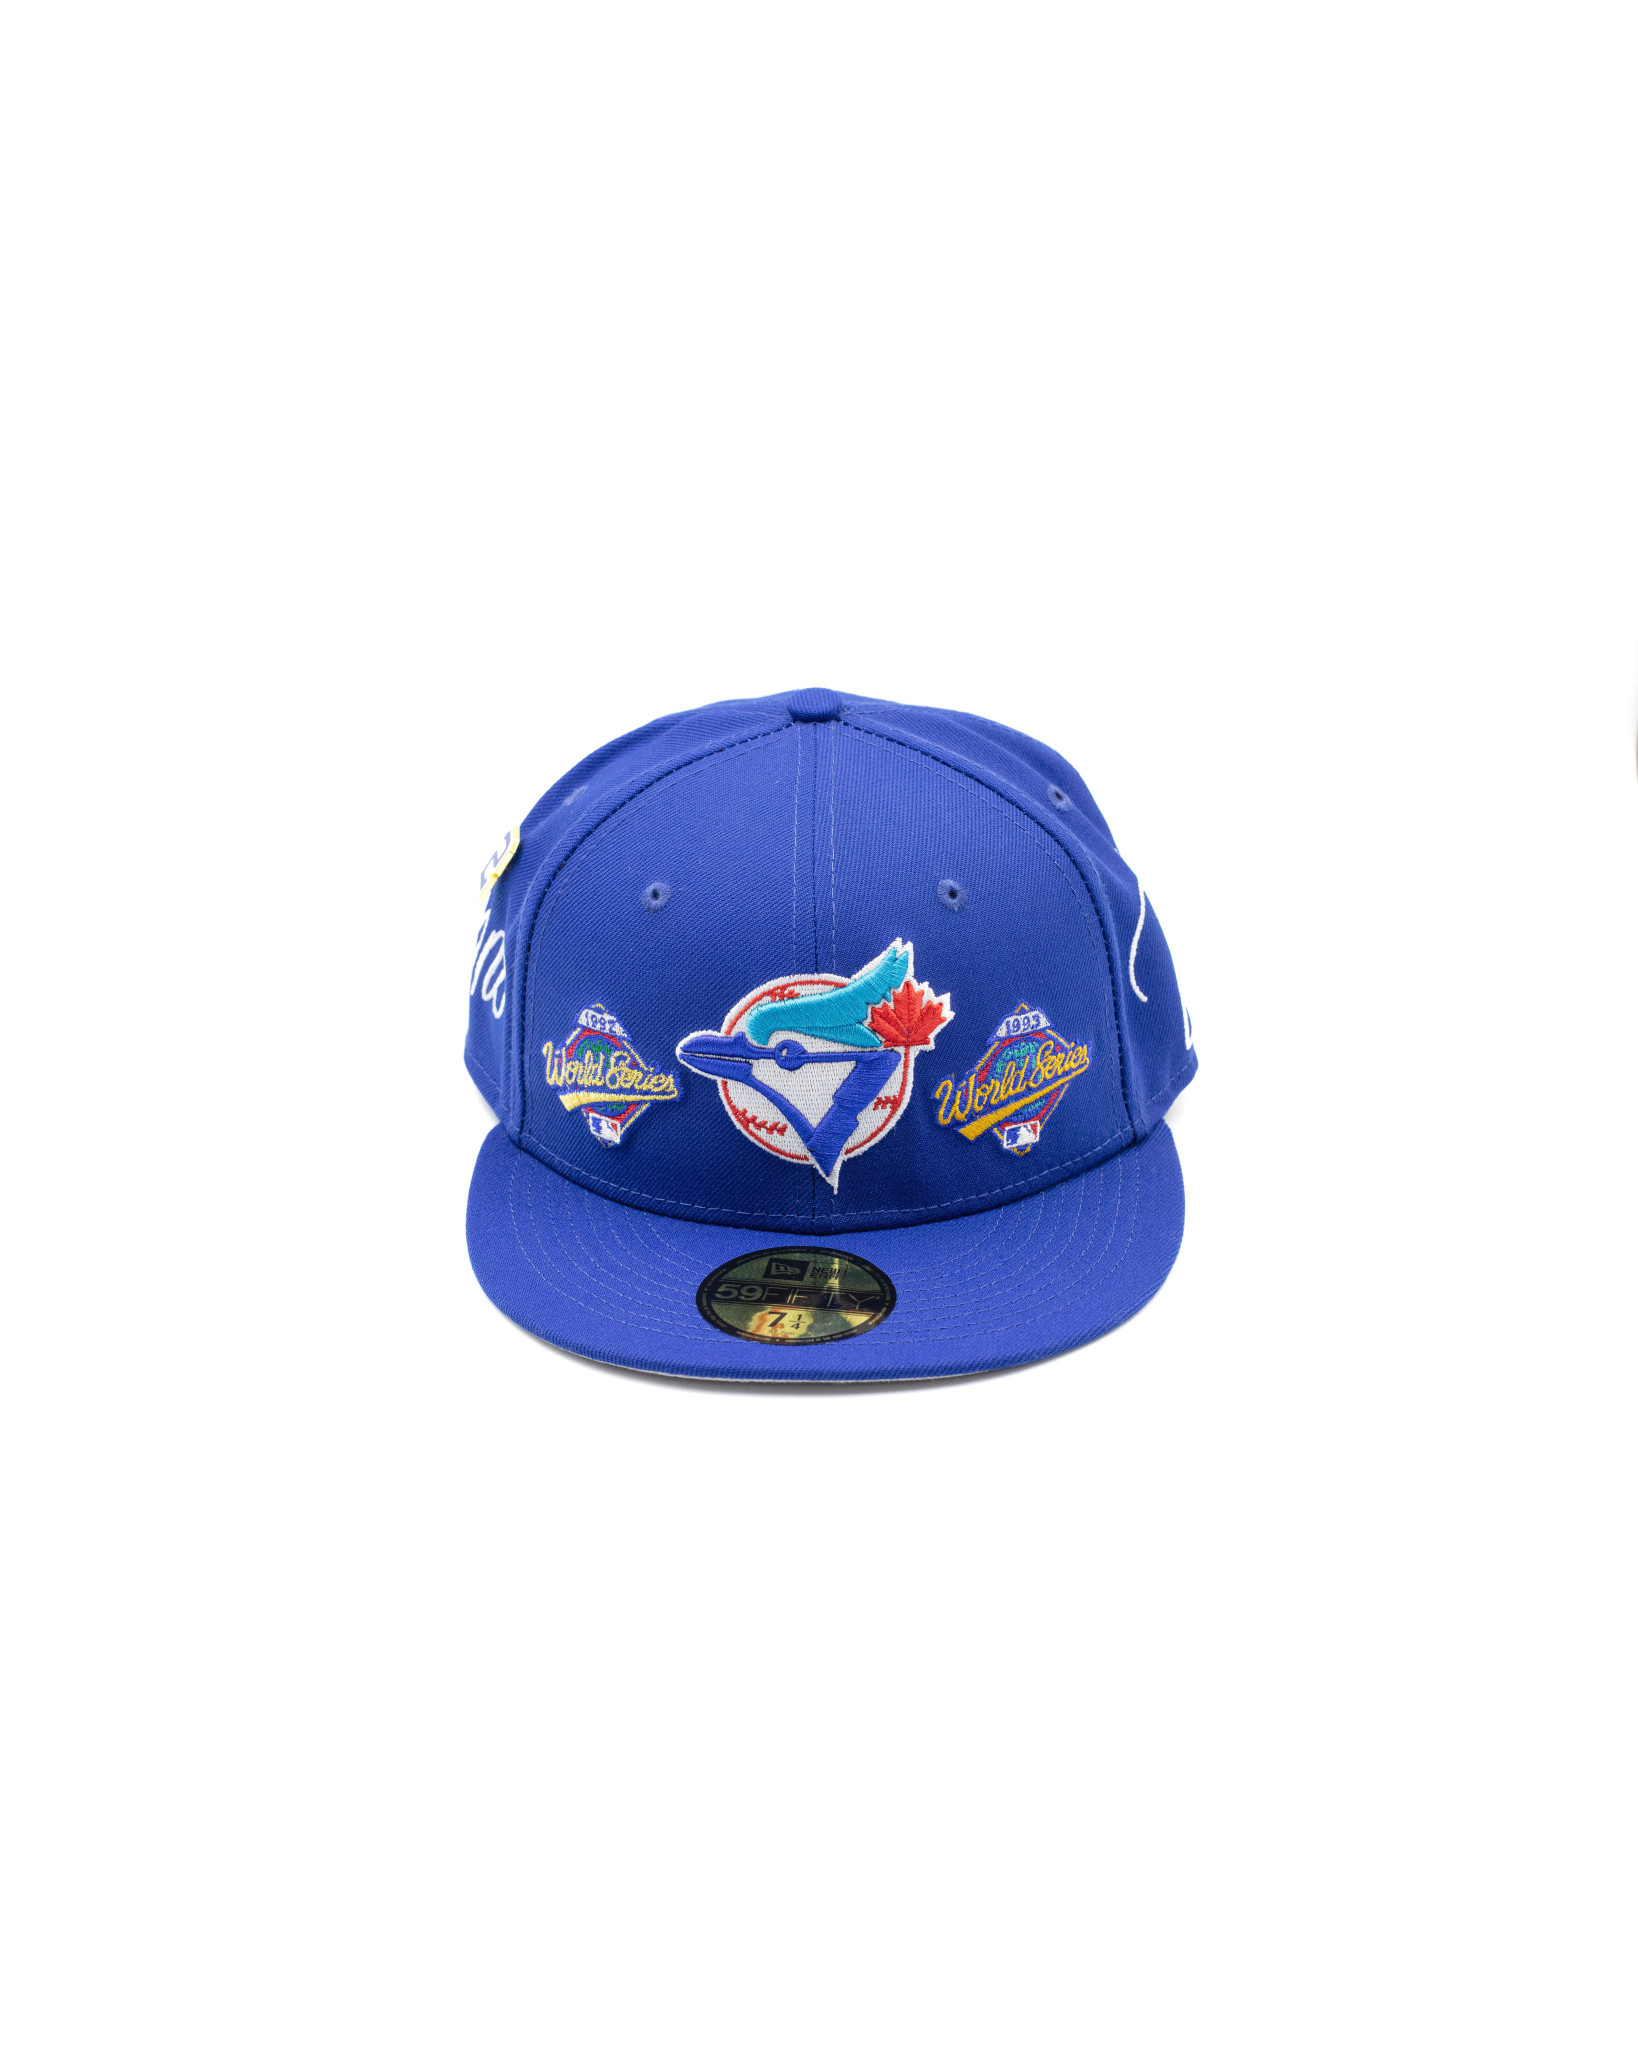 Blue Jays Size 7 New Era Fitted Hat